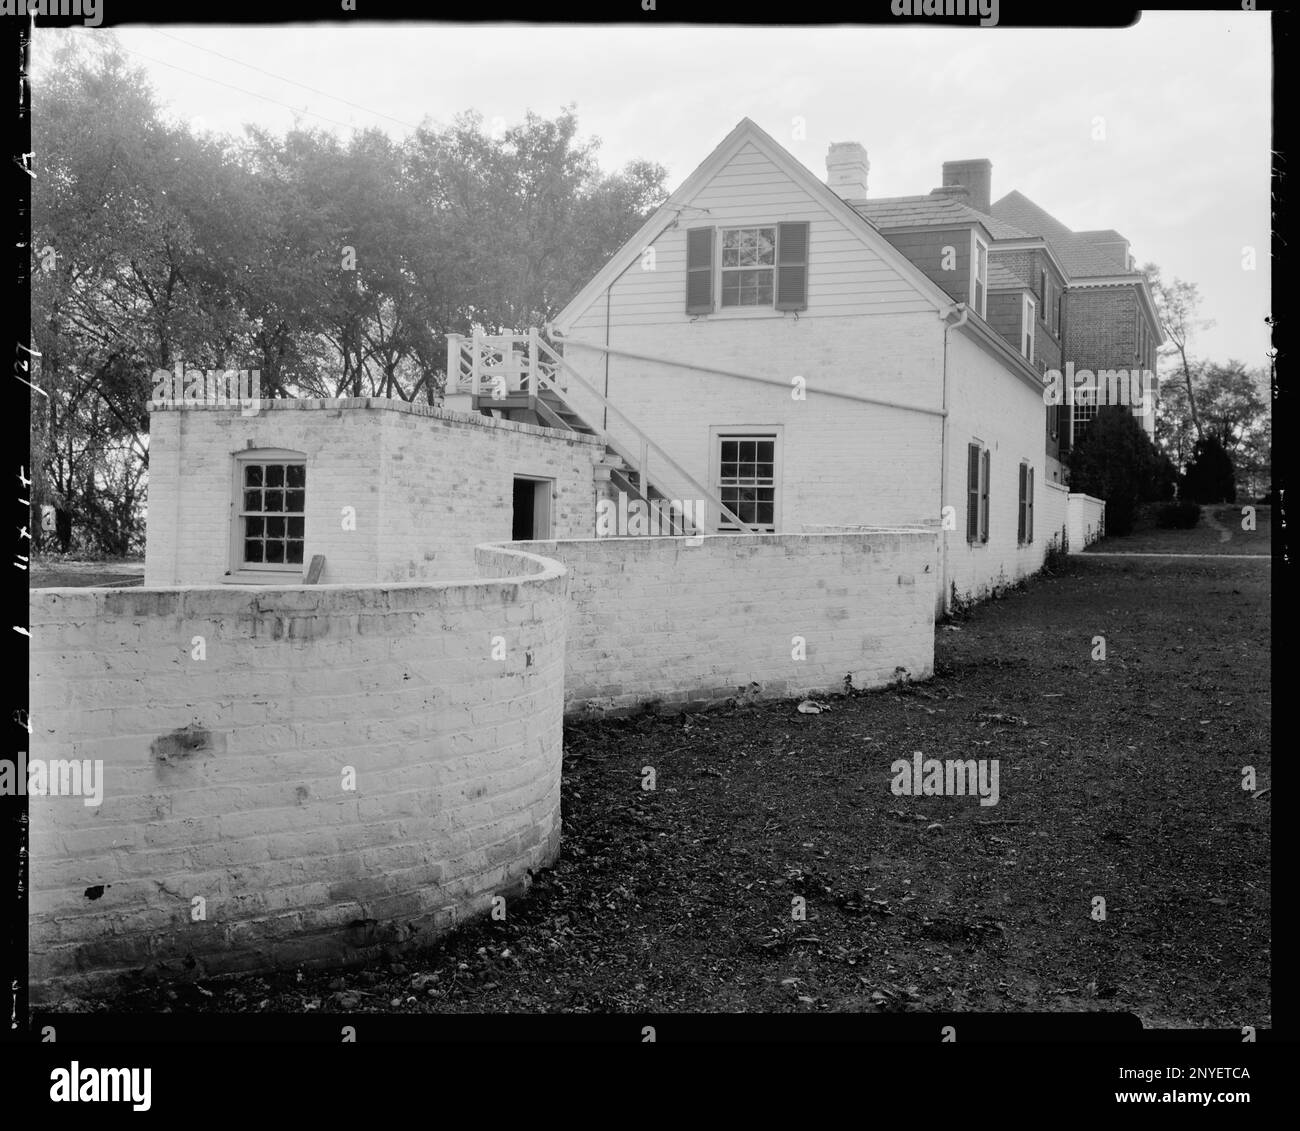 Redesdale, 8603 River Road, Richmond, Henrico County, Virginia. Carnegie Survey of the Architecture of the South. United States  Virginia  Henrico County  Richmond, Garden walls, Garages, Mansions. Stock Photo